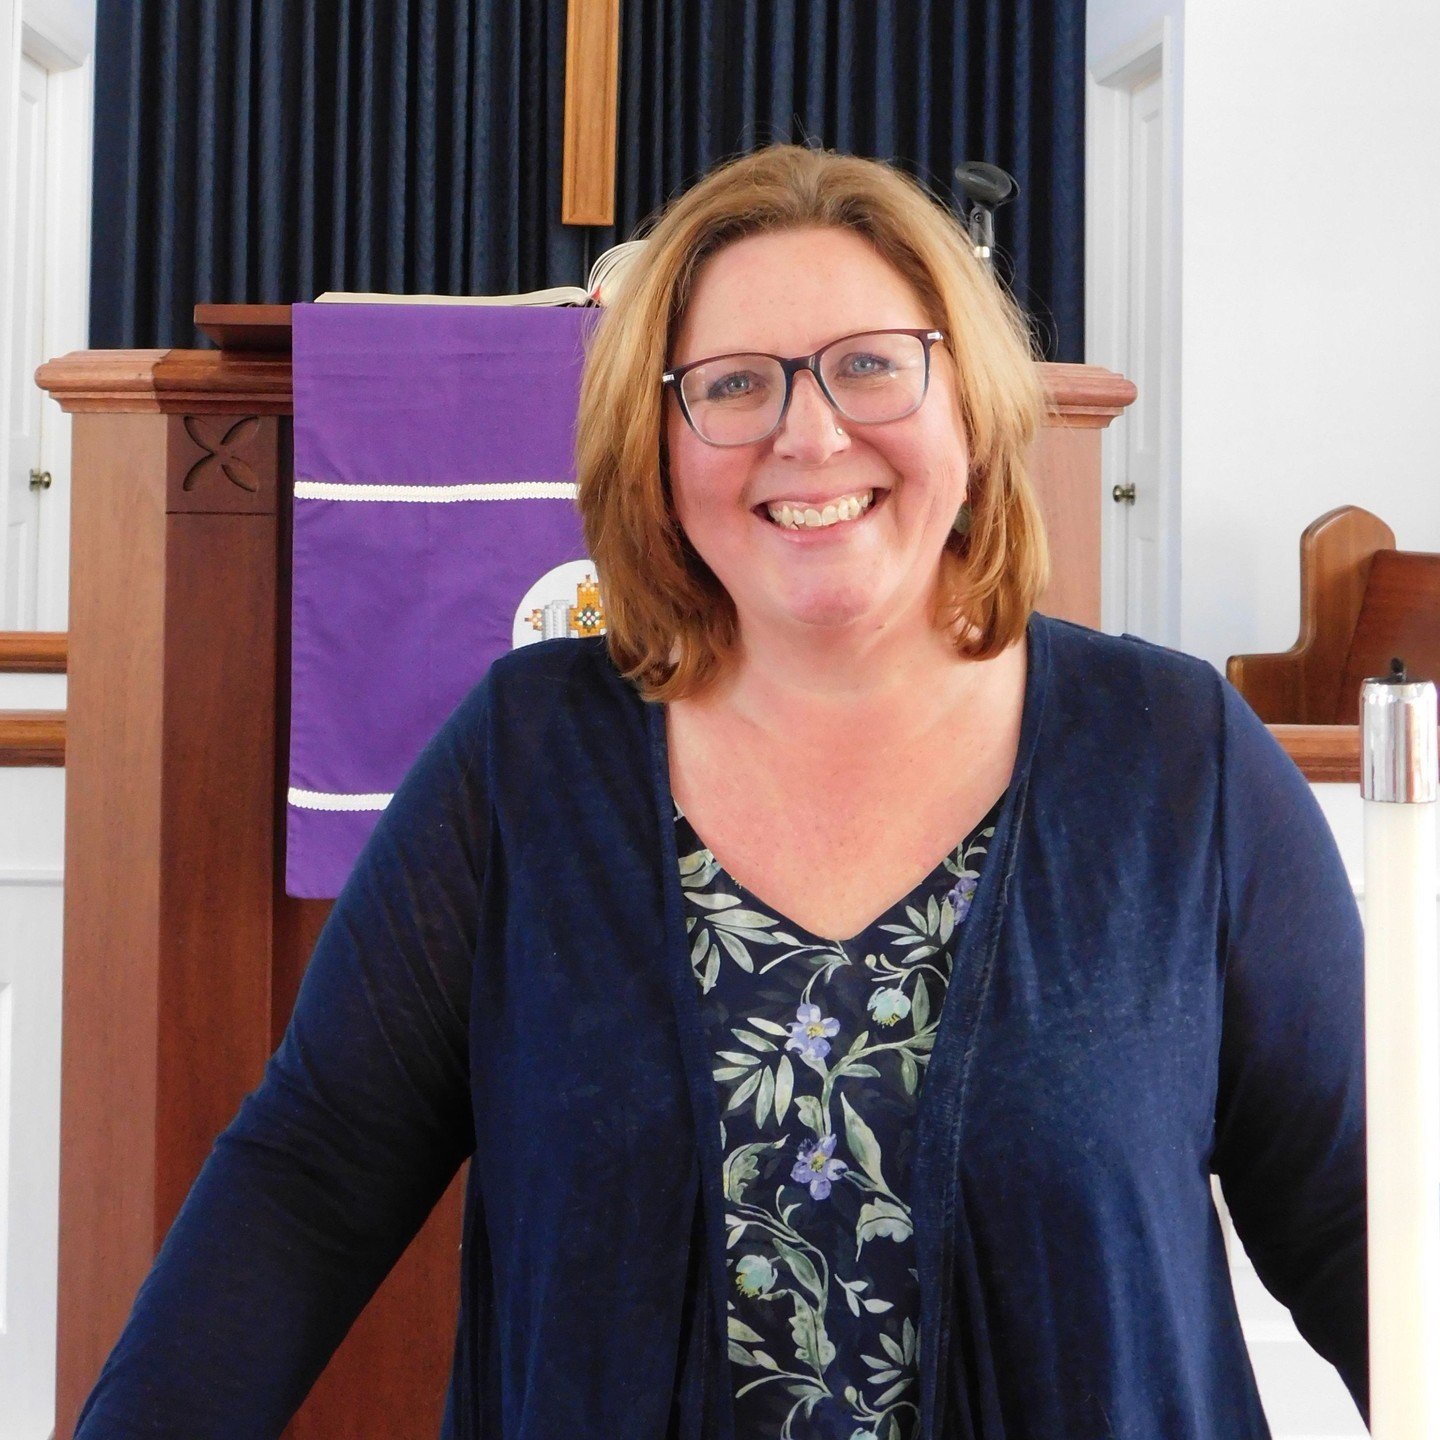 Interim Pastor Beth Scibienski will be joining us for worship on Sunday, April 14. We can't wait for Beth to begin her ministry at Hopewell Presbyterian Church!